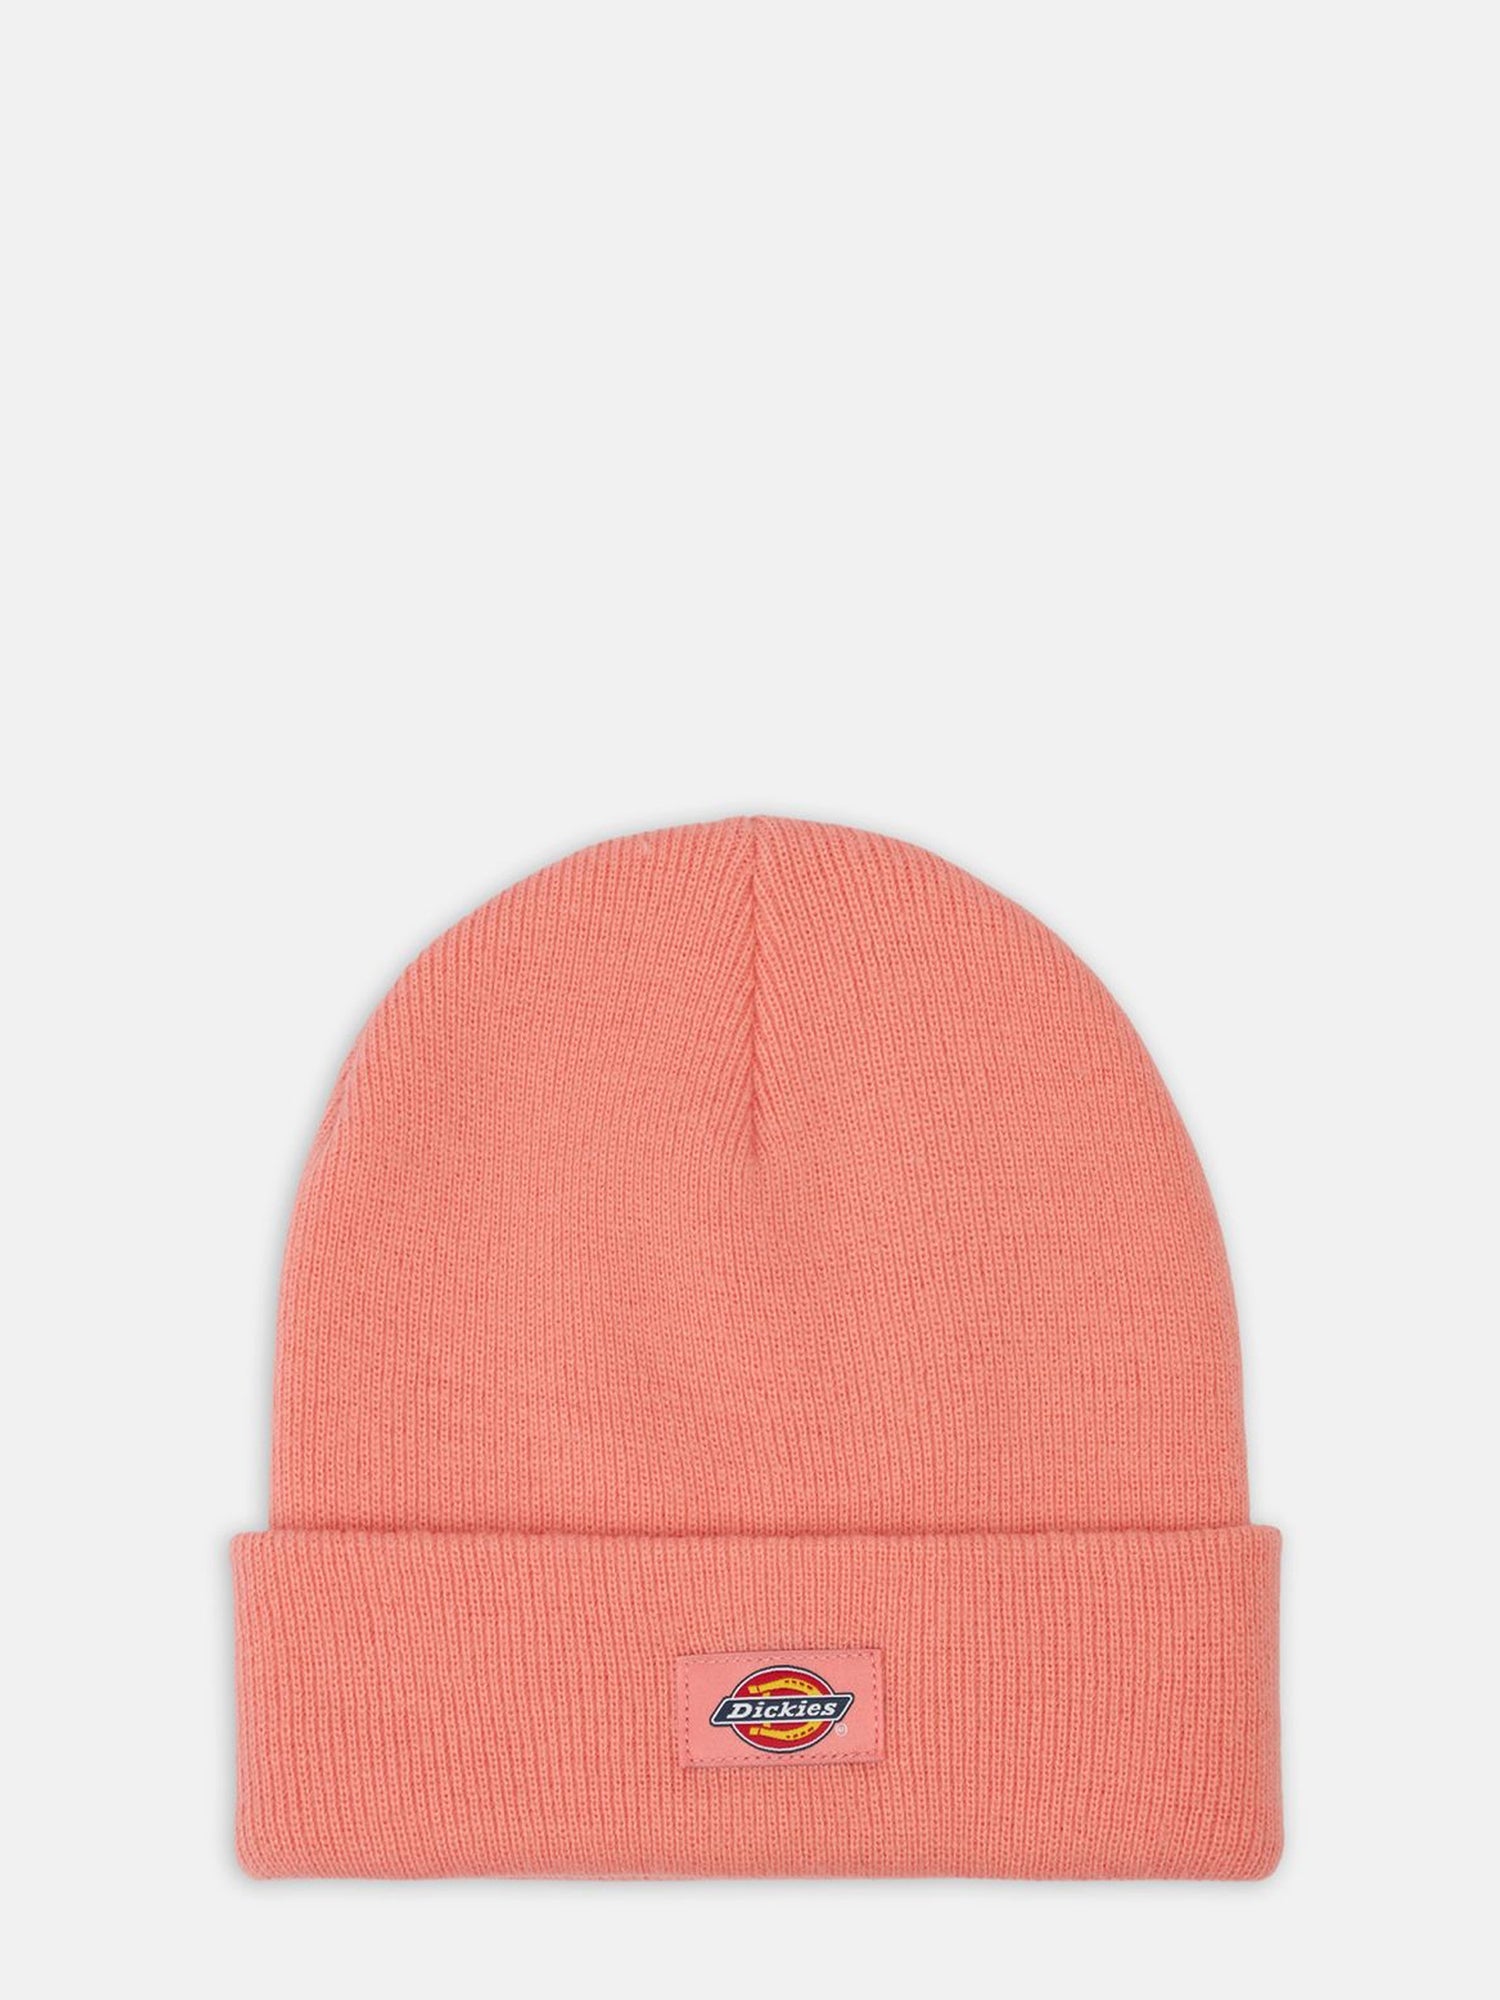 DICKIES CAPPELLO GIBSLAND ROSA